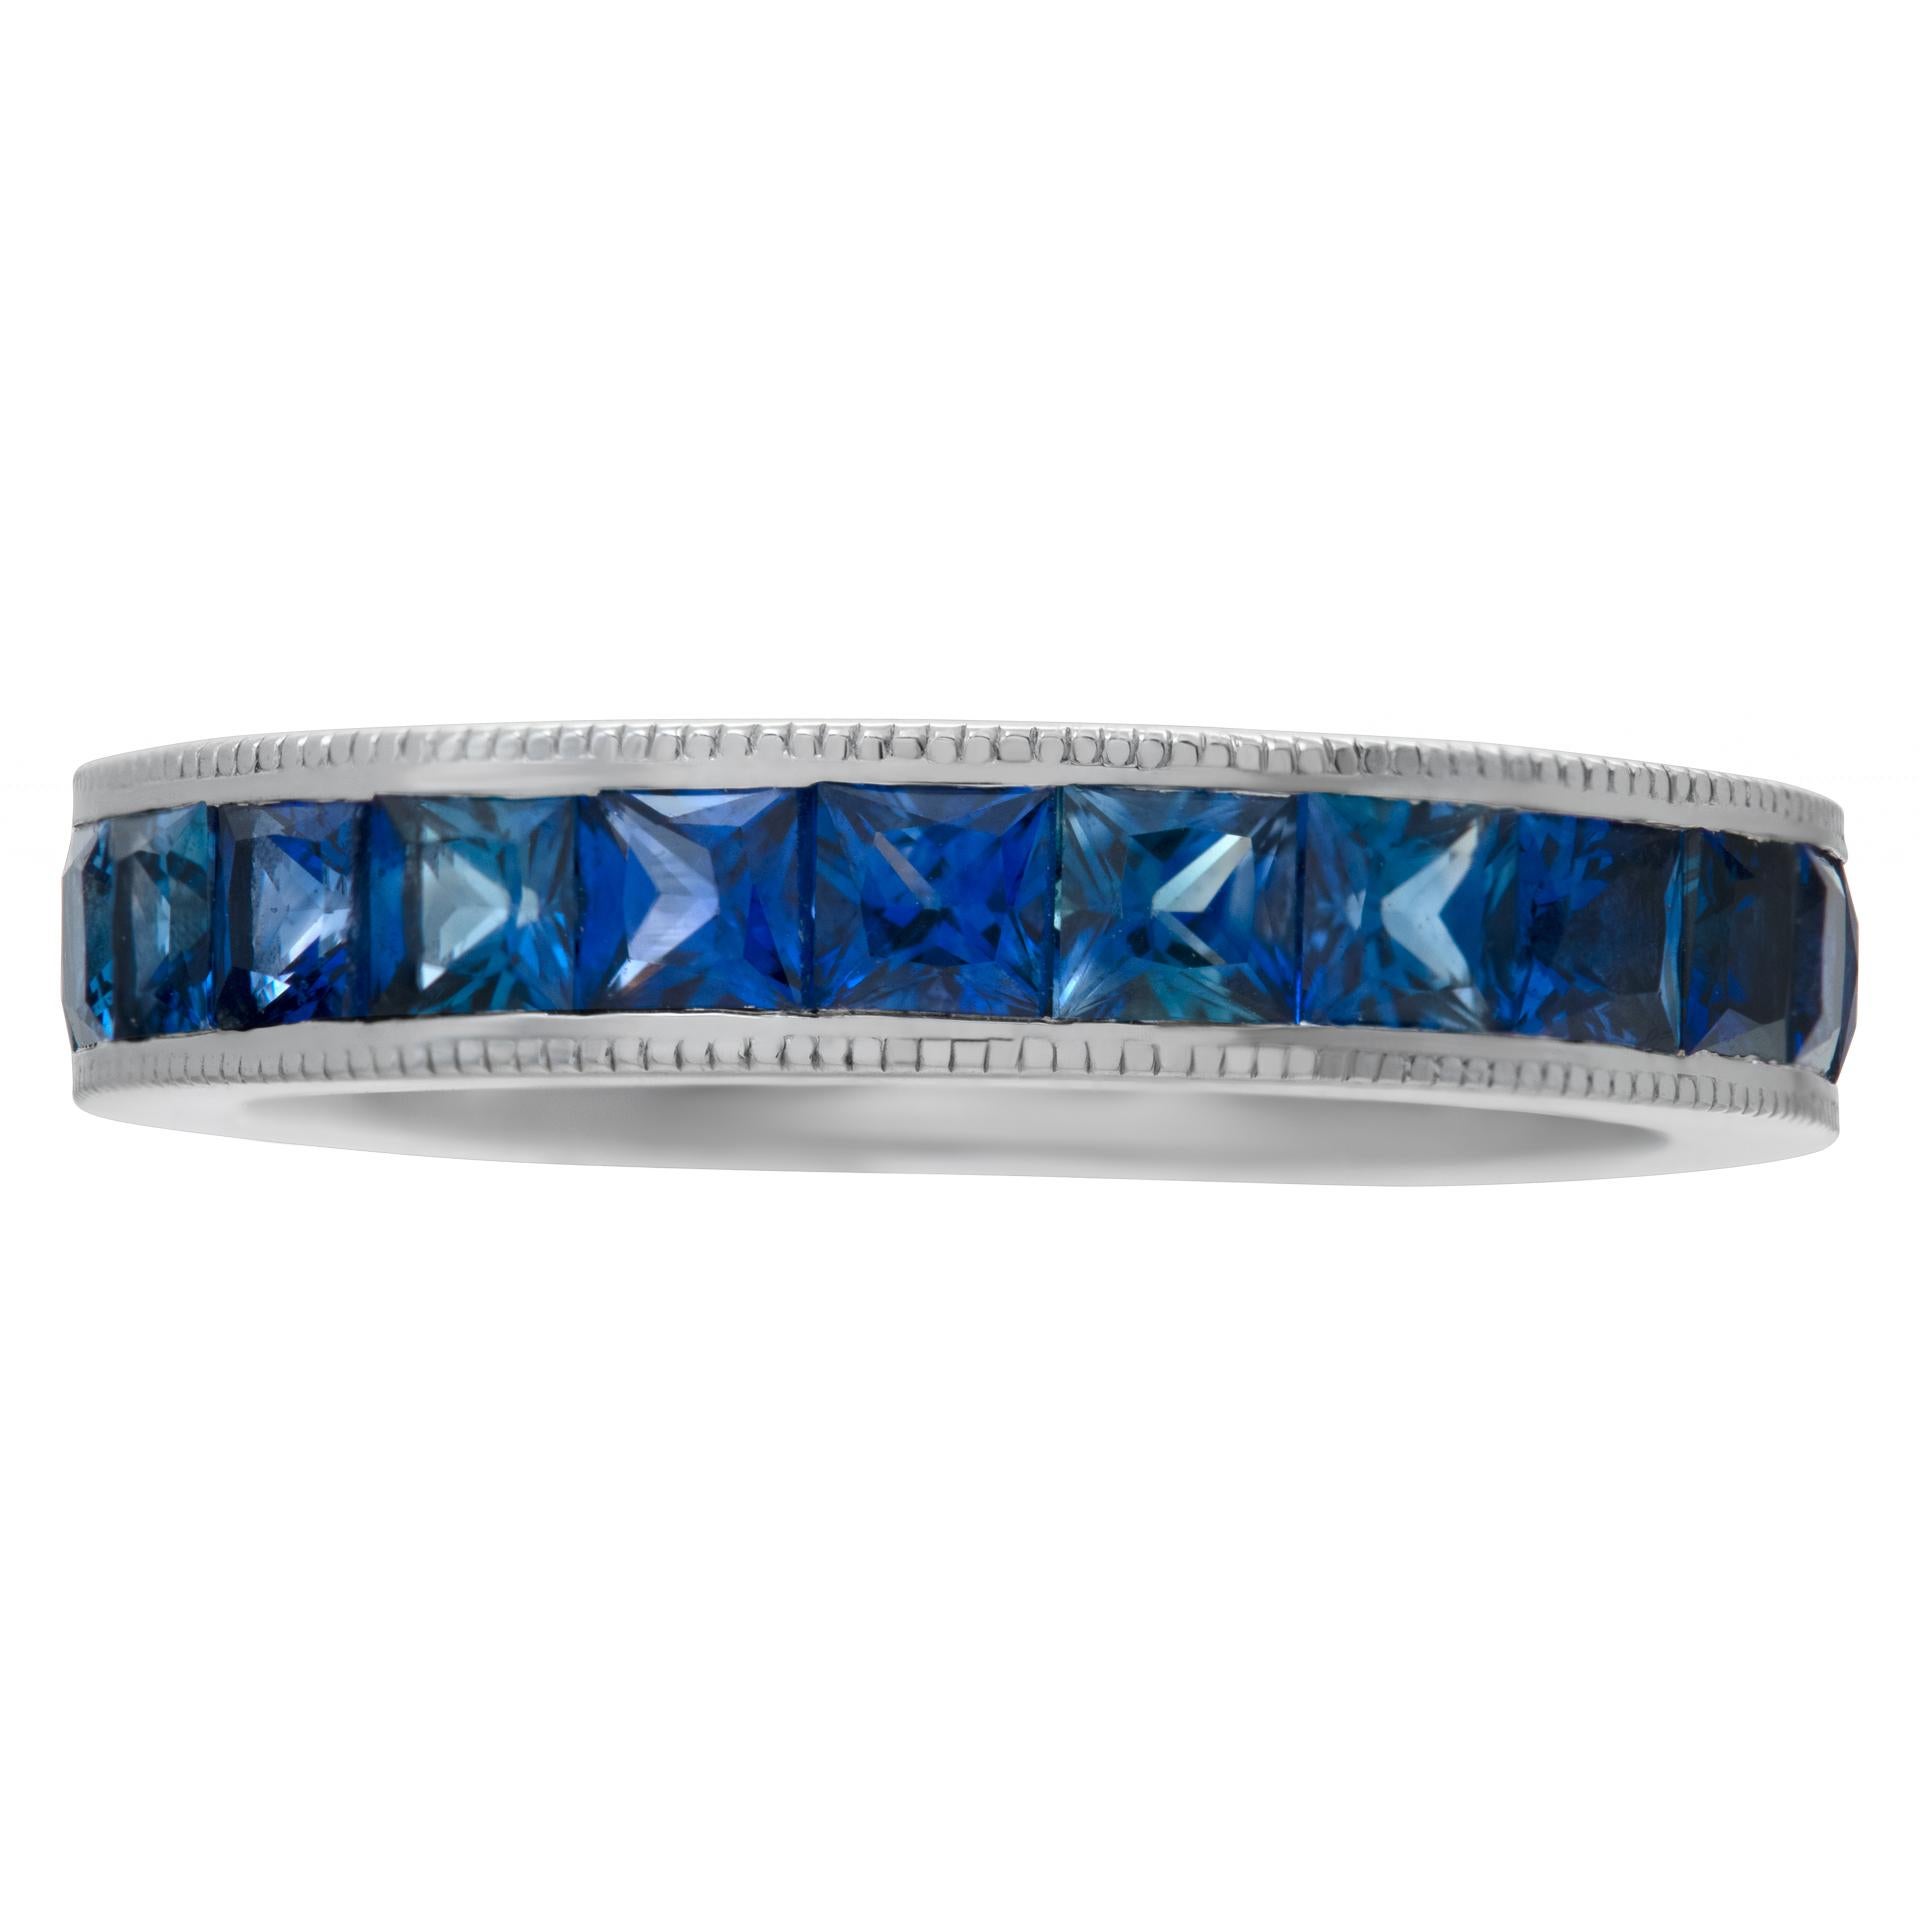 Blue sapphire eternity band in 14k white gold with approximately 4.50 carats in princess cut  blue sapphires. Size 7.25This Sapphire ring is currently size 7.25 and some items can be sized up or down, please ask! It weighs 4.1 pennyweights and is